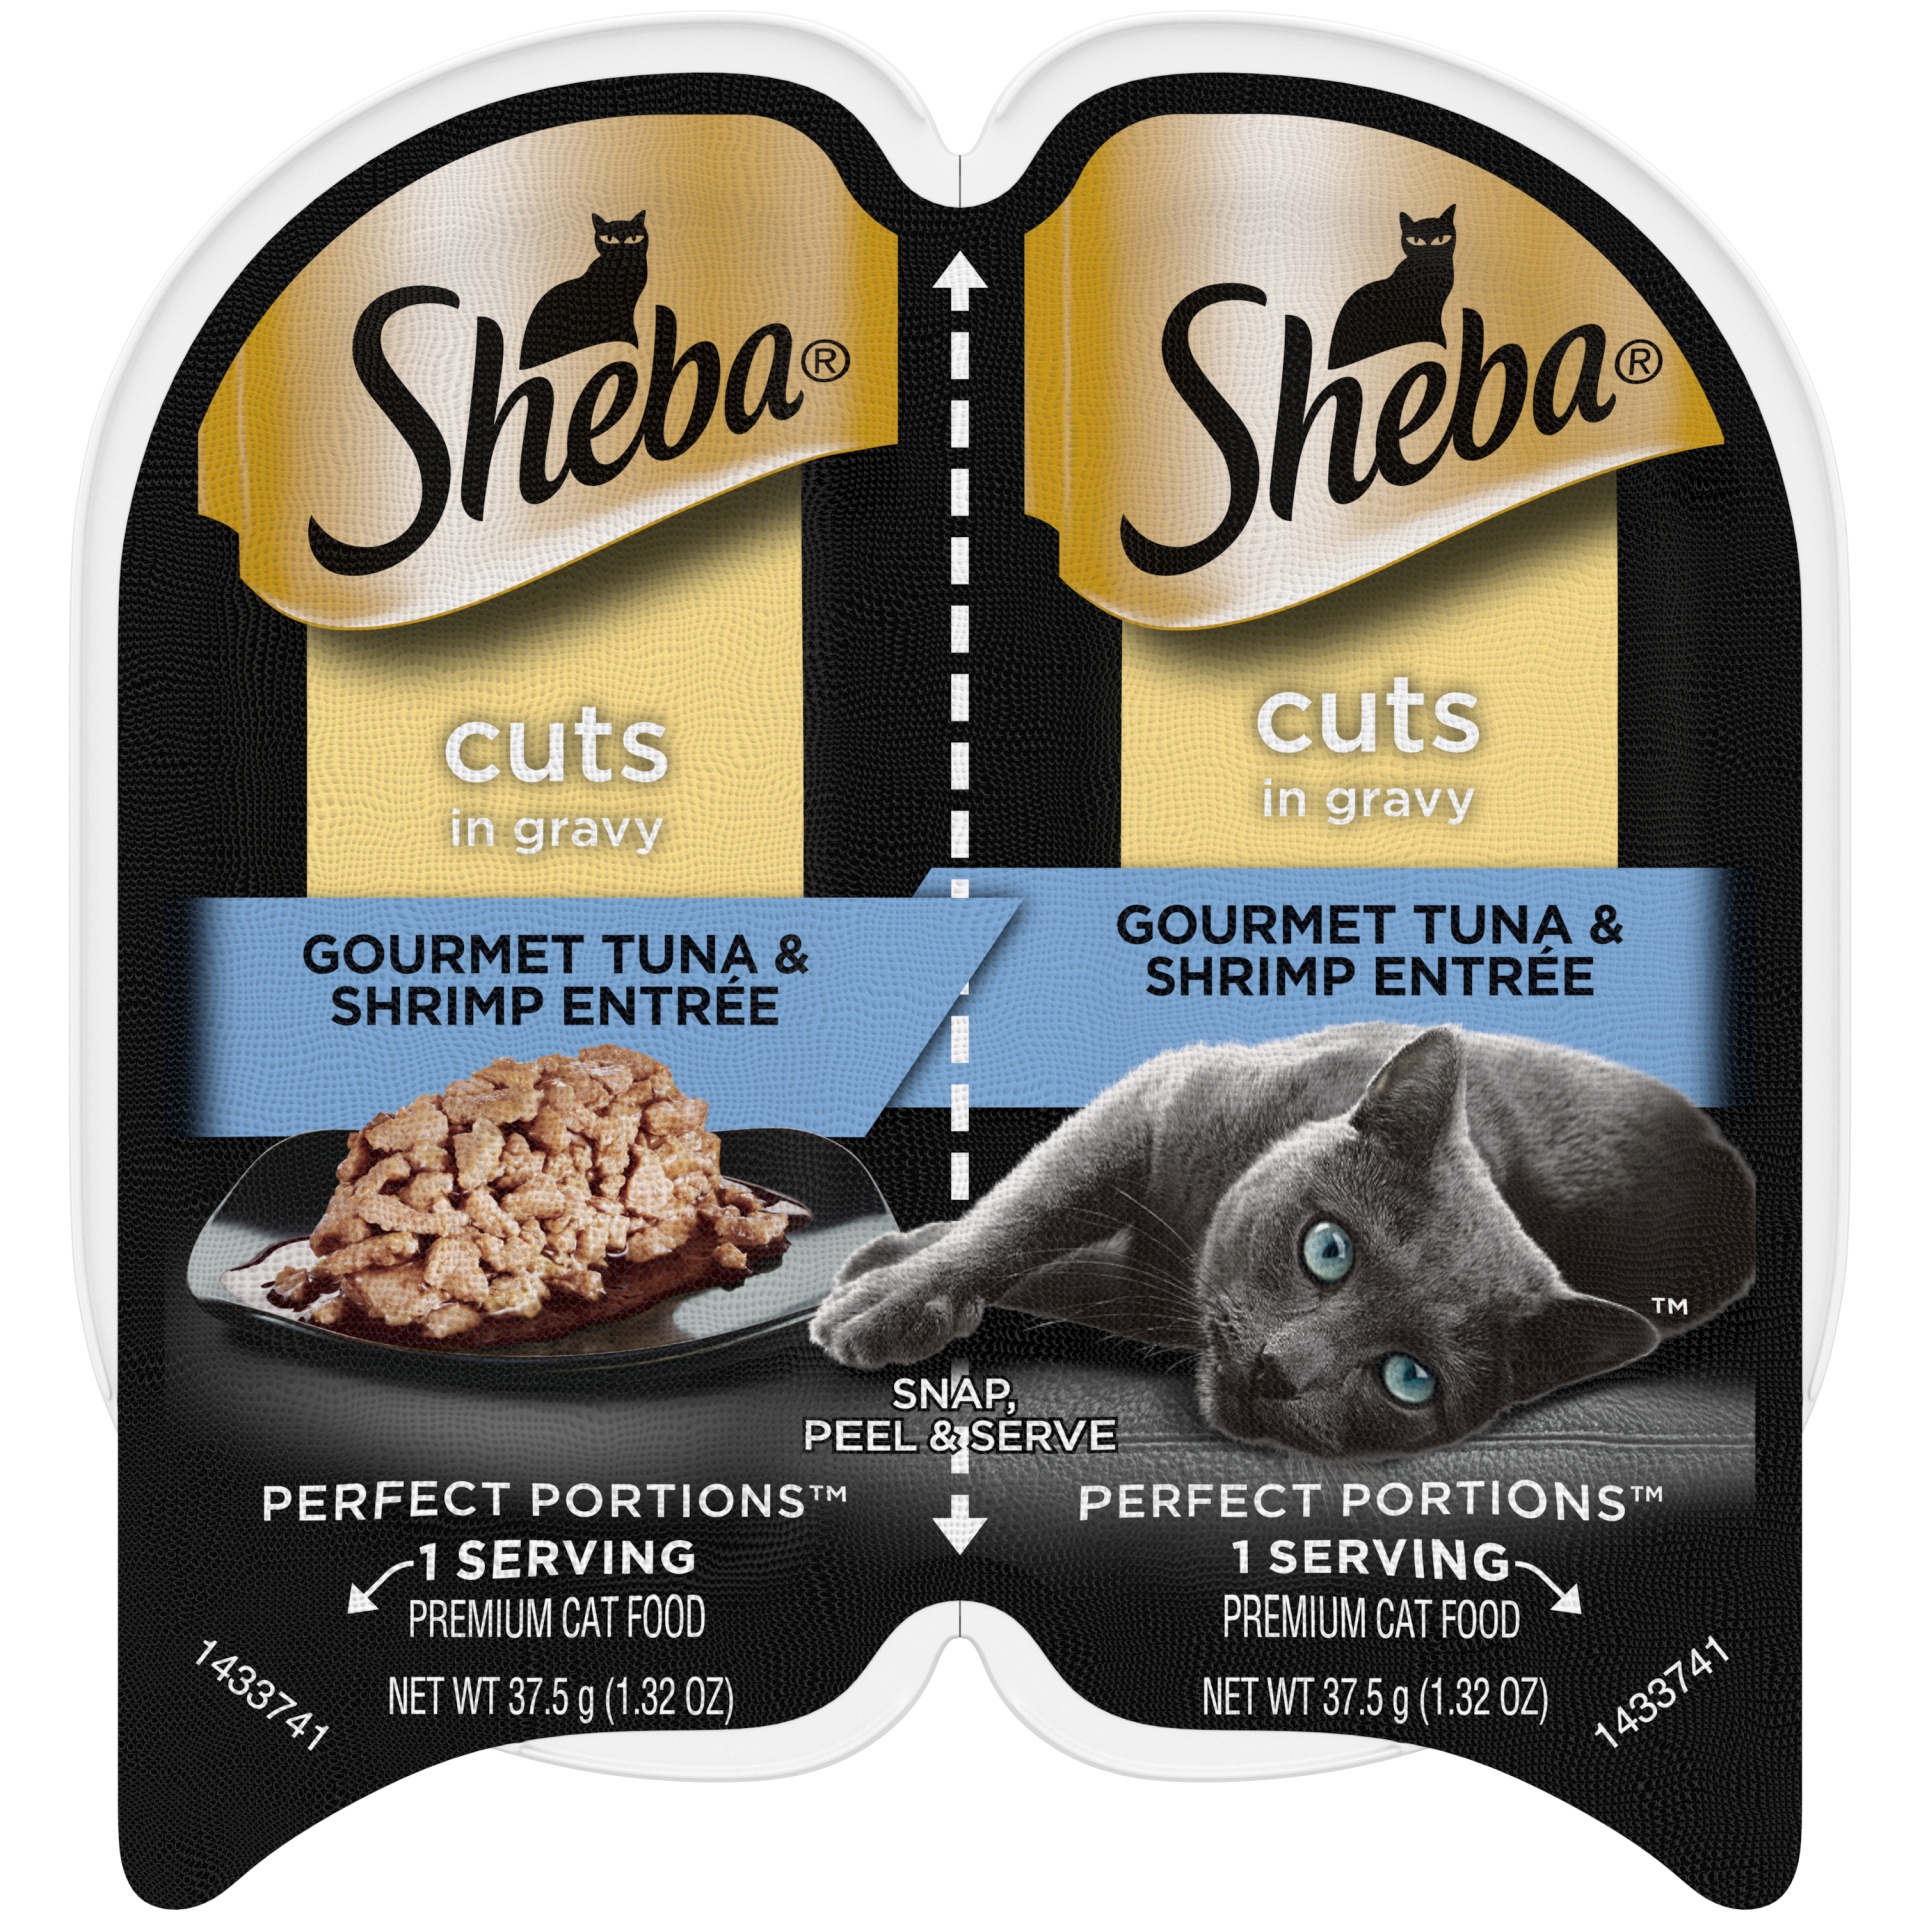 slide 1 of 9, SHEBA Wet Cat Food Cuts in Gravy Gourmet Tuna & Shrimp Entree, (24) PERFECT PORTIONS Twin-Pack Trays, 2.64 oz